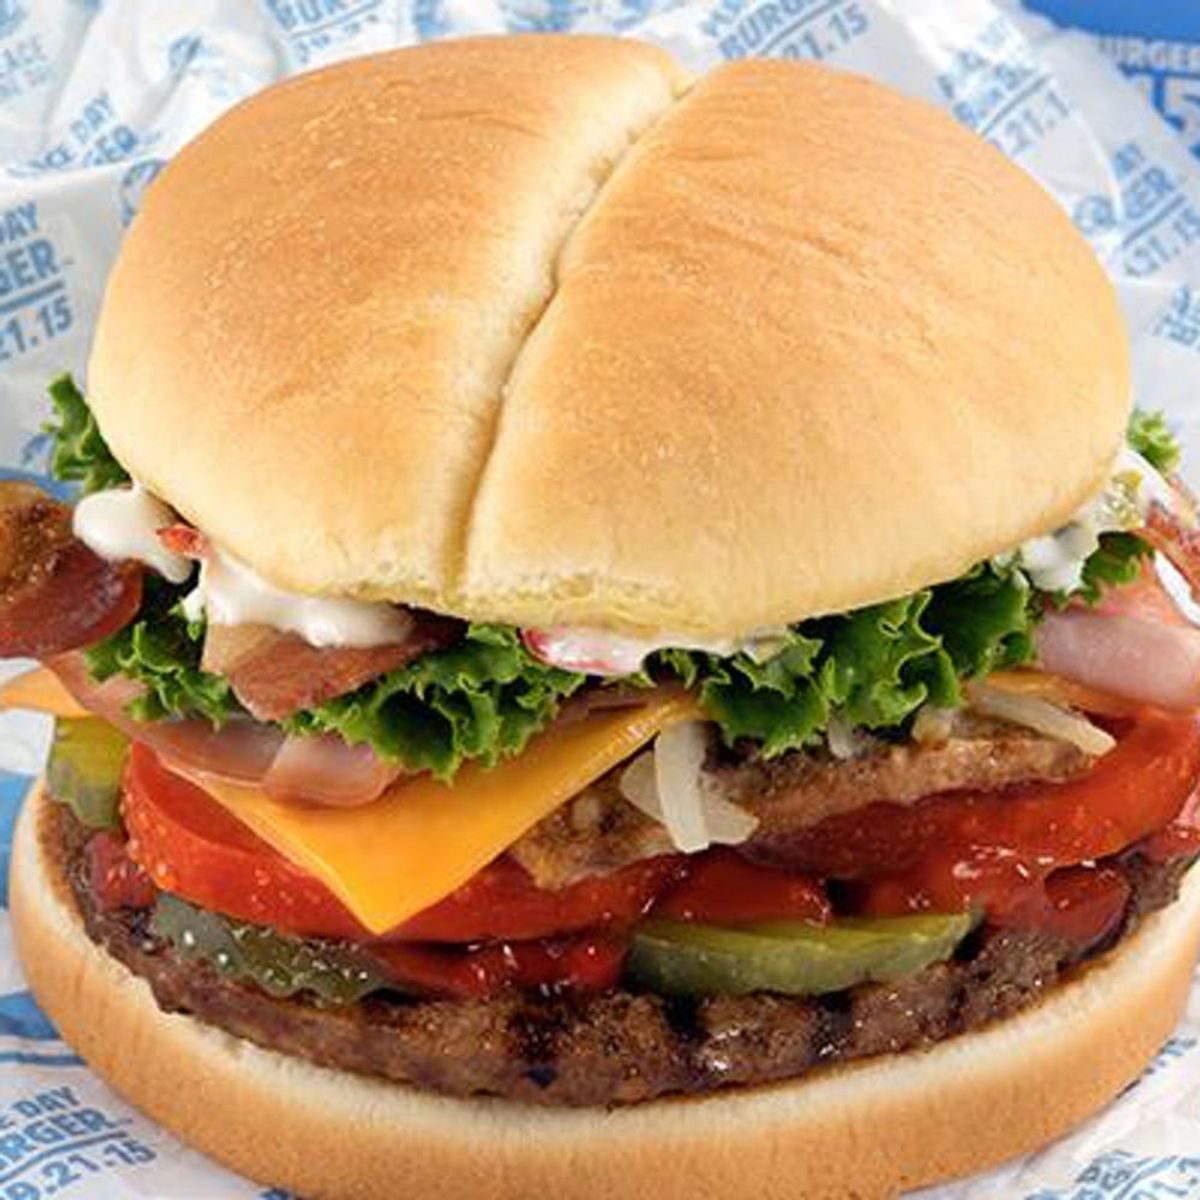 Food Porn Alert: This Fast Food Burger Is the Craziest One Yet